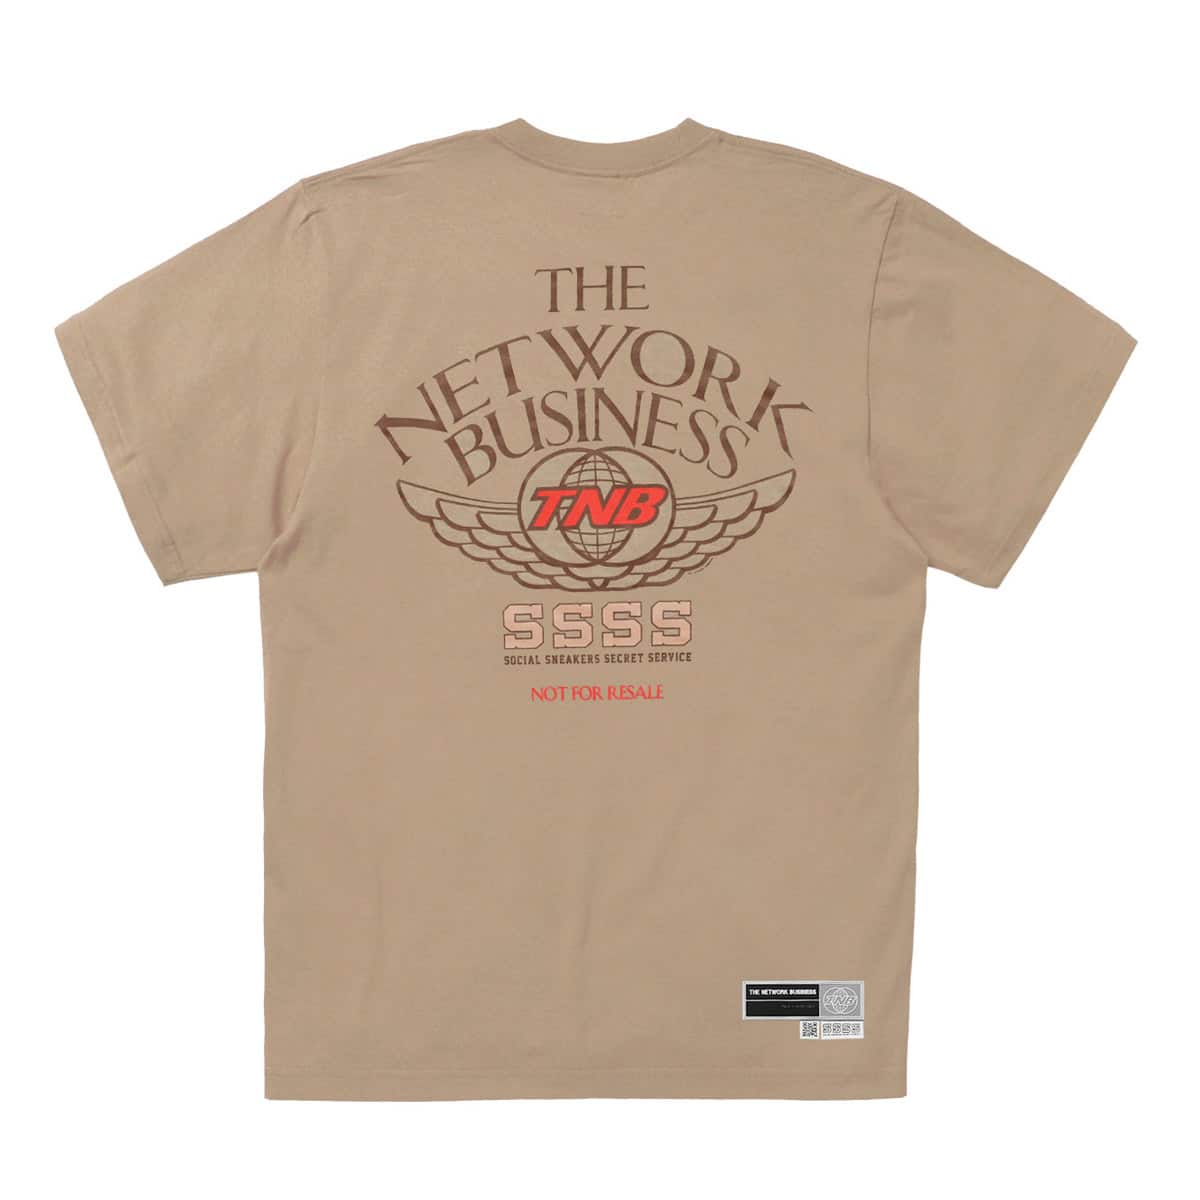 THE NETWORK BUSINESS WING Tee ホワイト 21SP-I